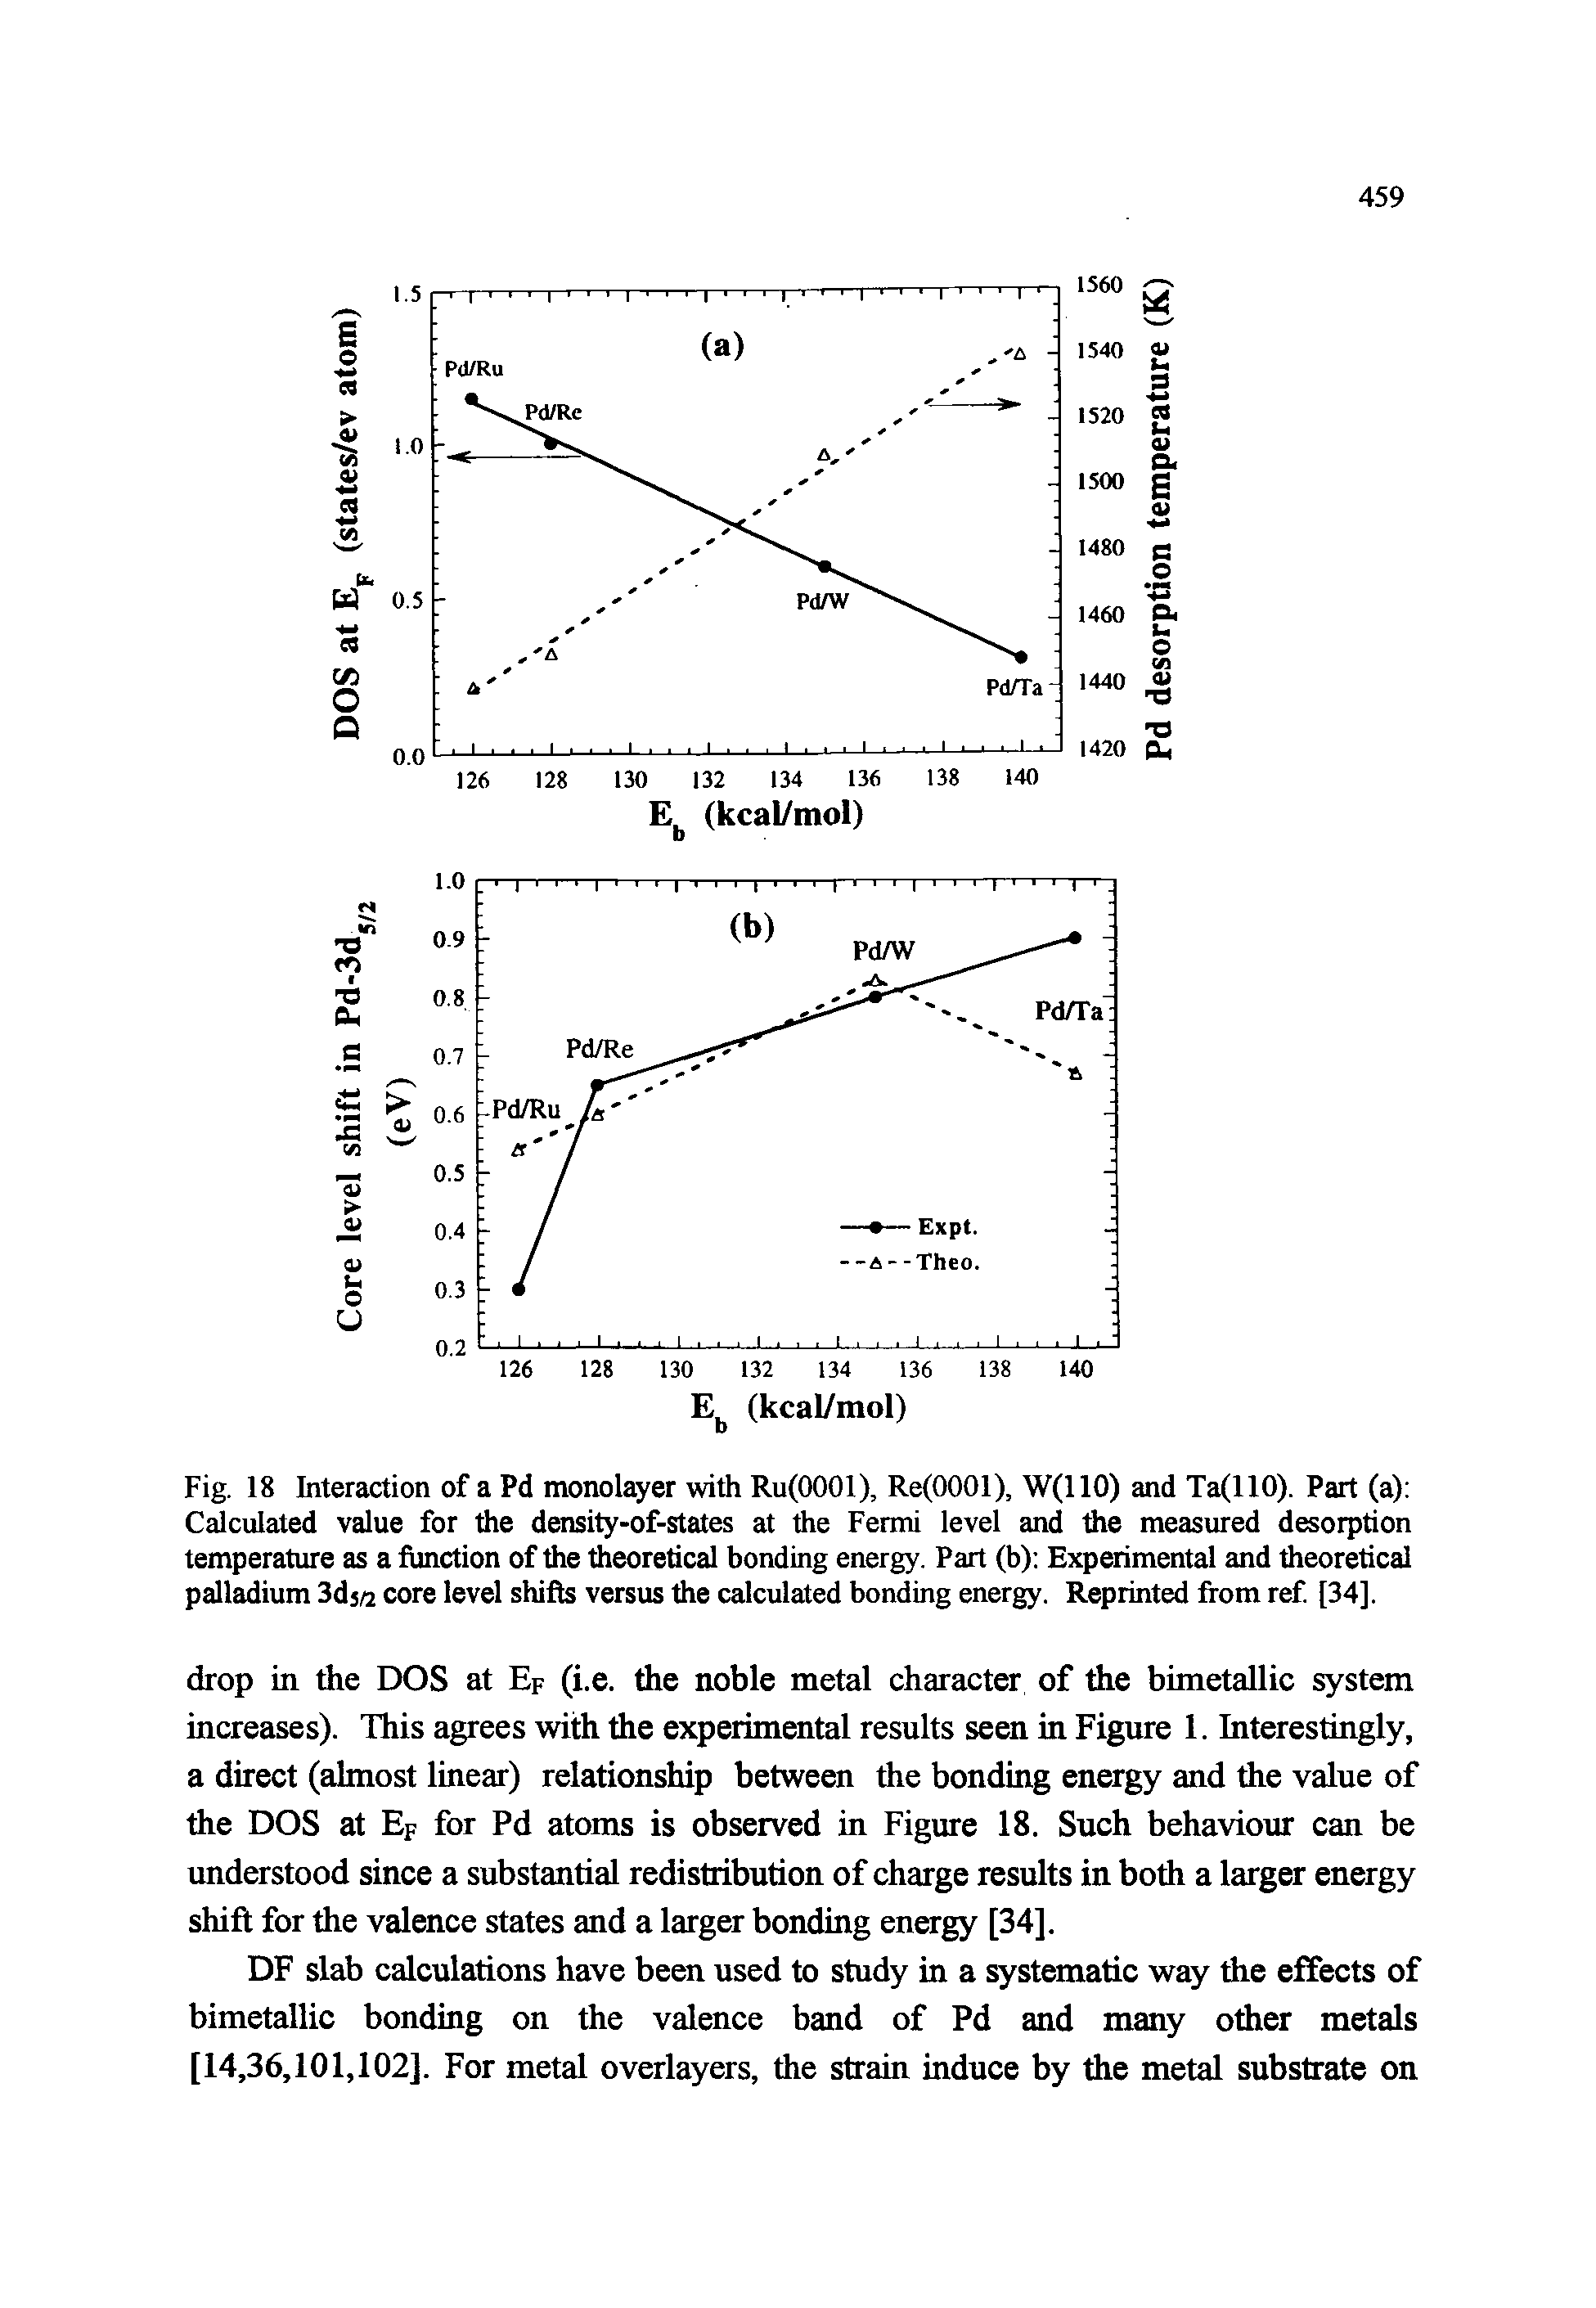 Fig. 18 Interaction of a Pd monolayer with Ru(0001), Re(0001), W(llO) and Ta(110). Part (a) Calculated value for the density-of-states at the Fermi level and the measured desorption temperature as a function of the theoretical bonding energy. Part (b) Experimental and theoretical palladium Sdja core level shifts versus the calculated bonding energy. Reprinted from ref [34].